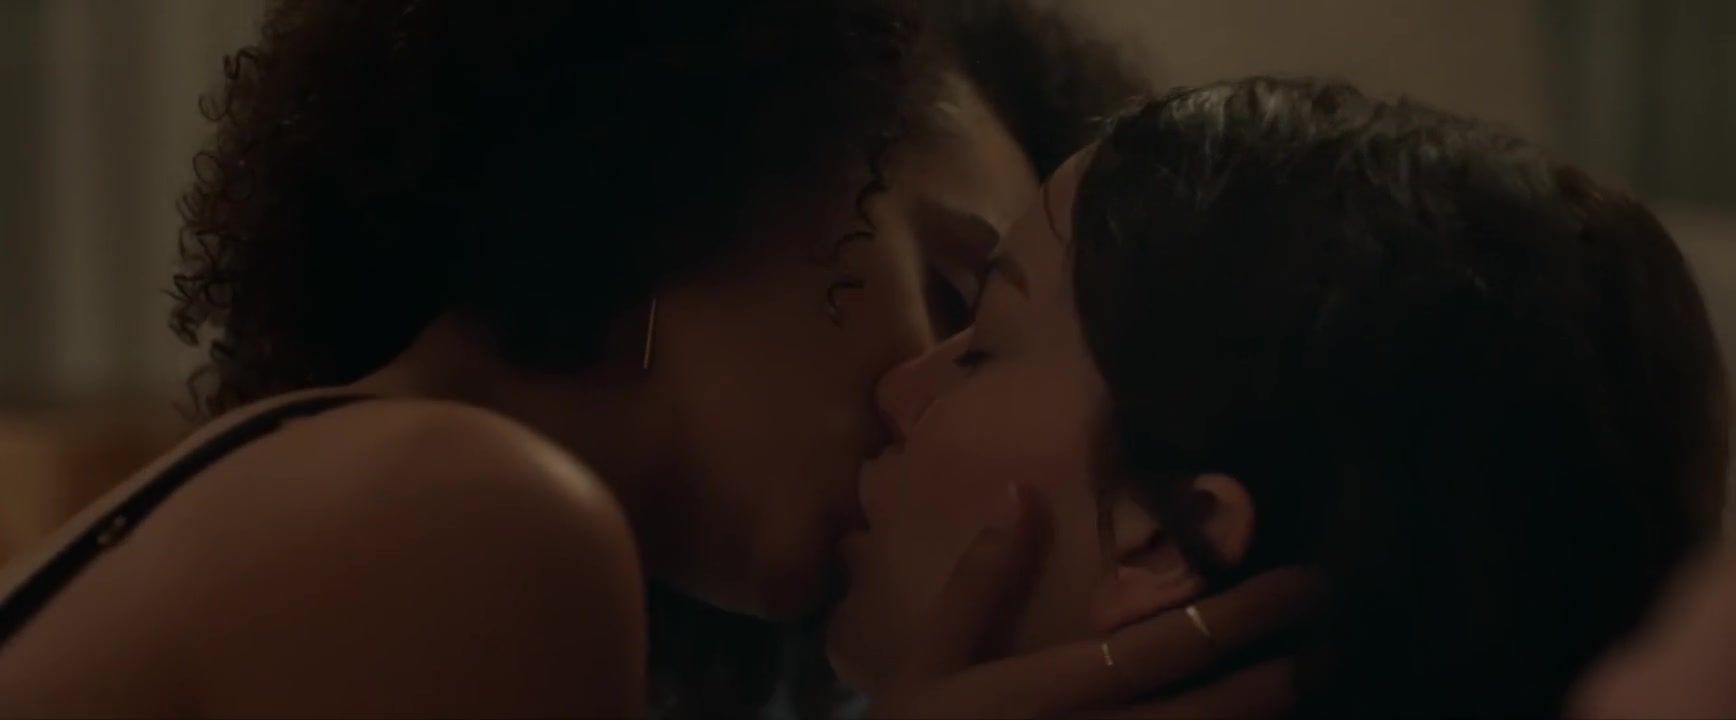 Adulter.Club Black Nathalie Emmanuel joins white co-star Britt Lower nude in Holly Slept Over (2020) Seduction - 1